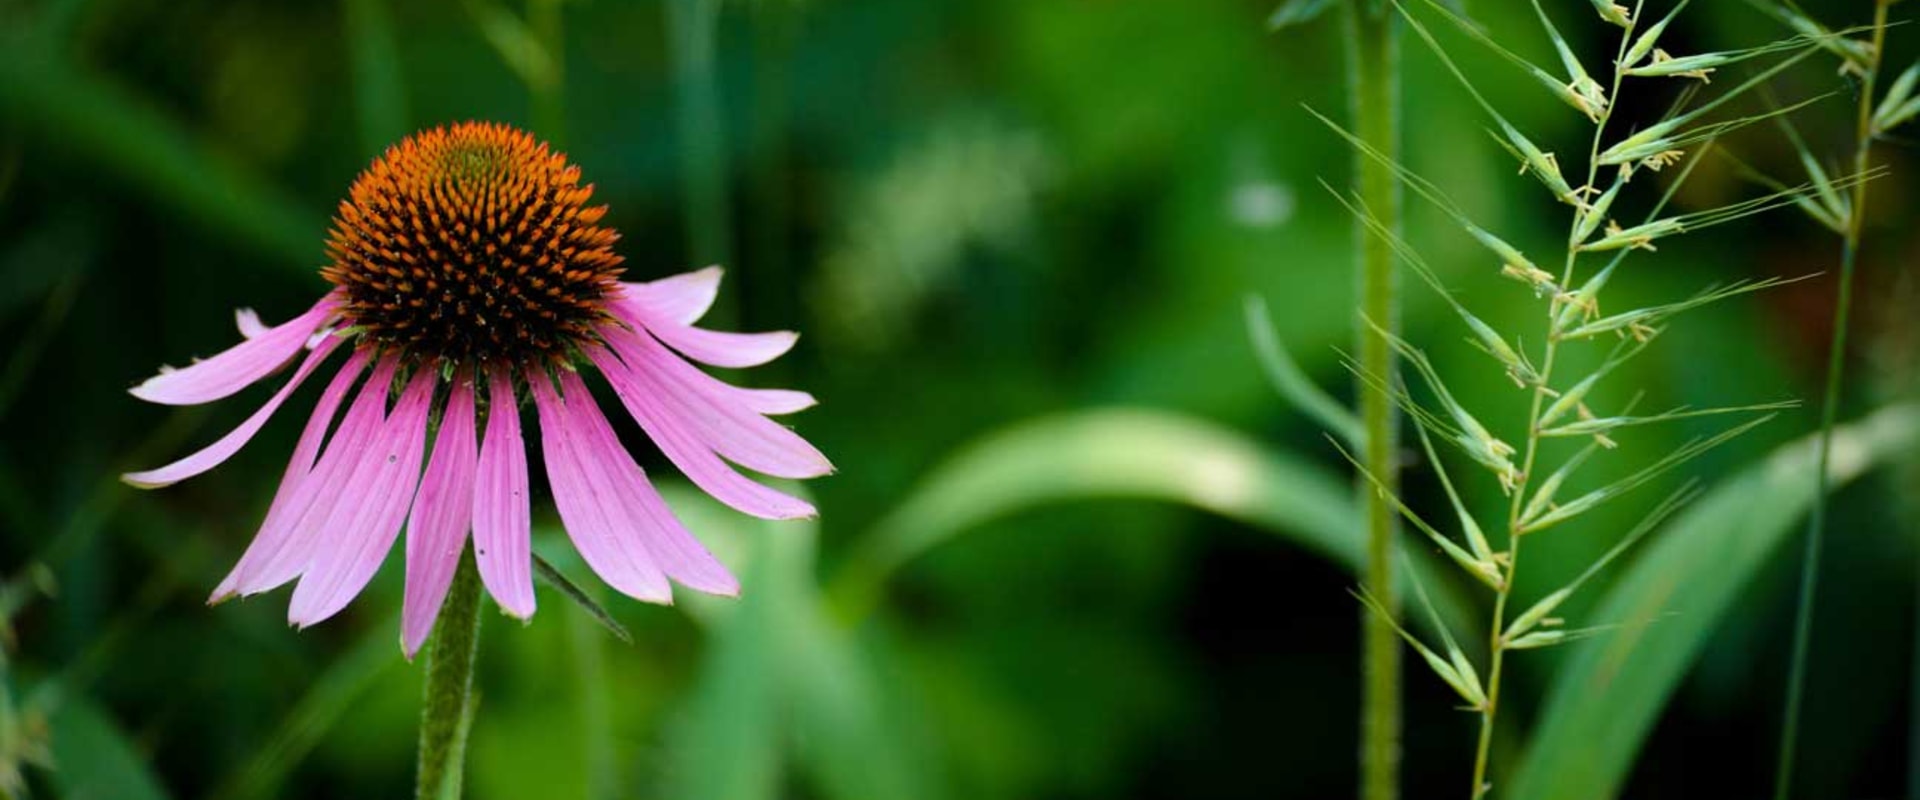 Echinacea: An Overview of Benefits, Uses, and Types